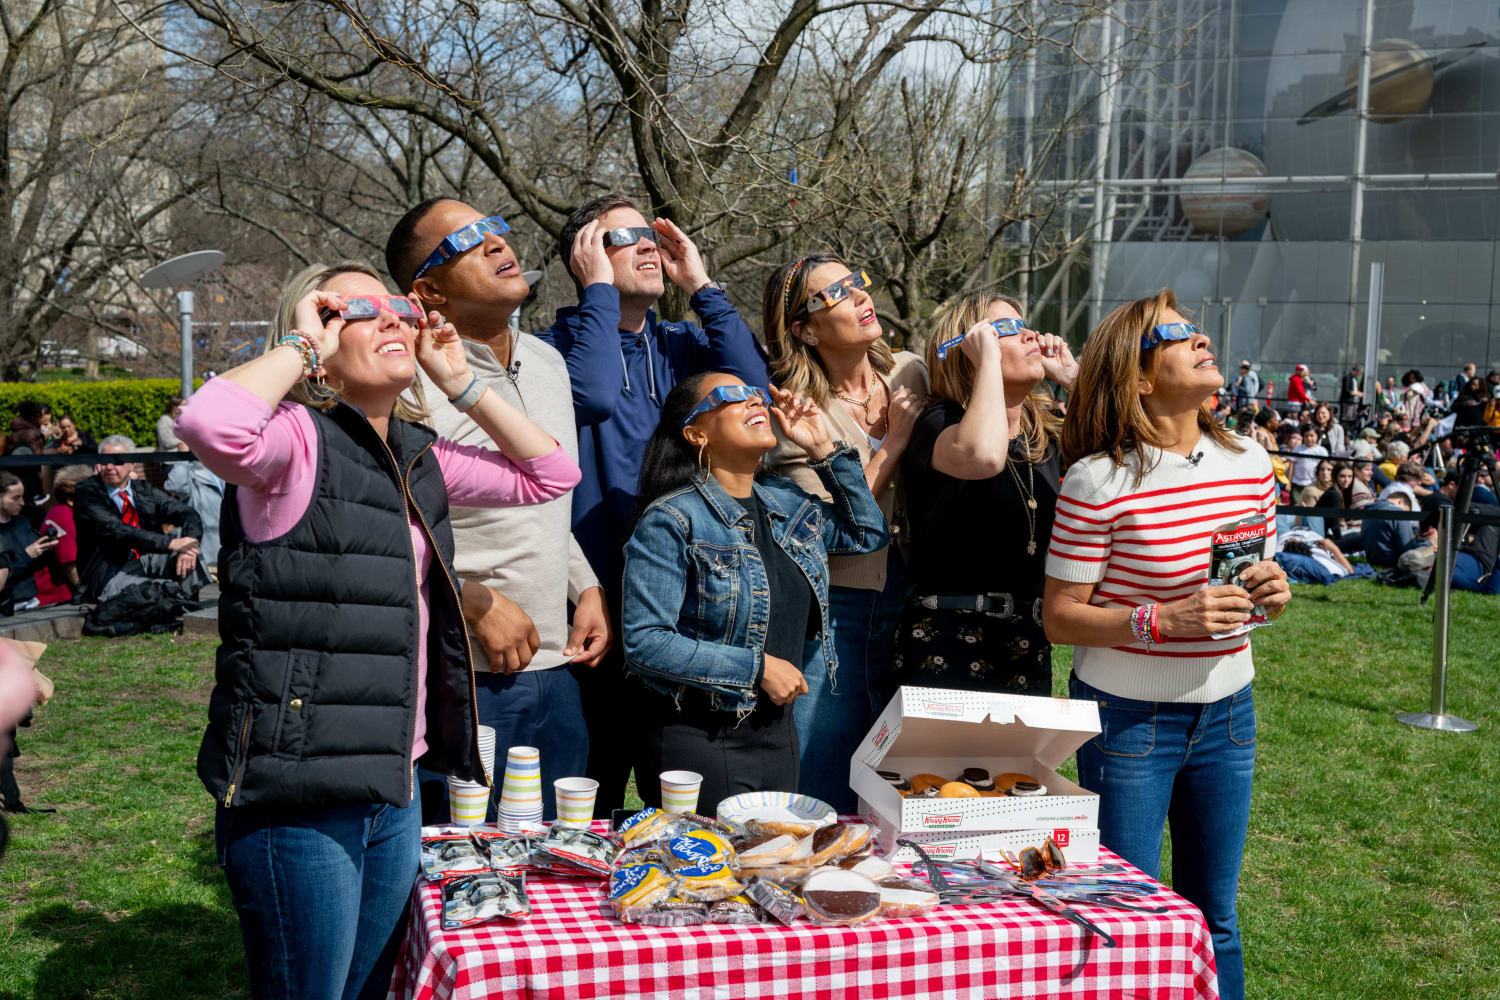 See all the fun the TODAY team had watching the eclipse together with their kids